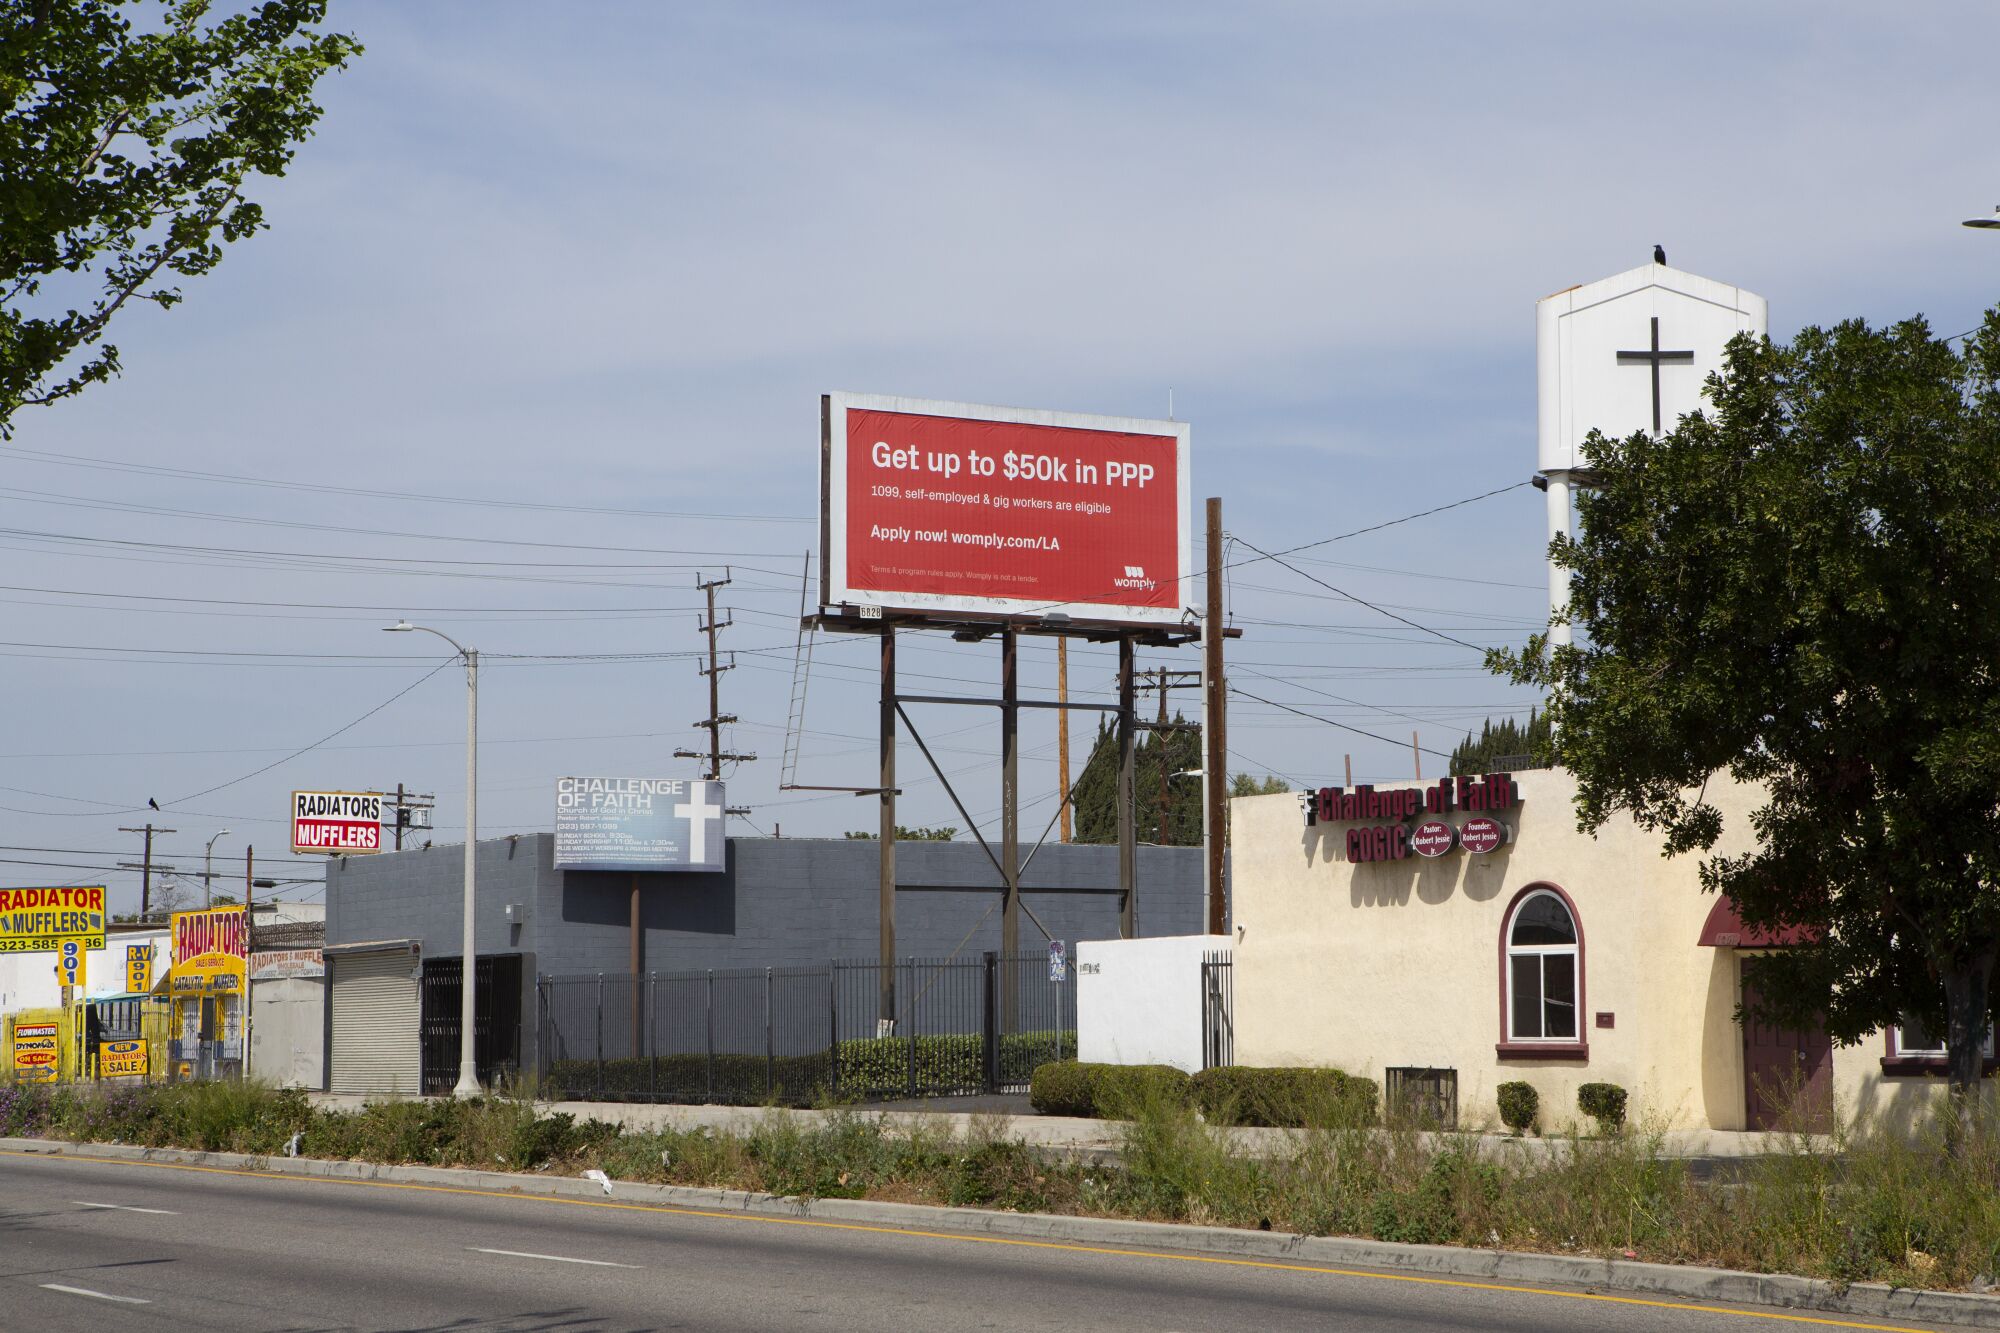 A red billboard says Get up to $50k in PPP